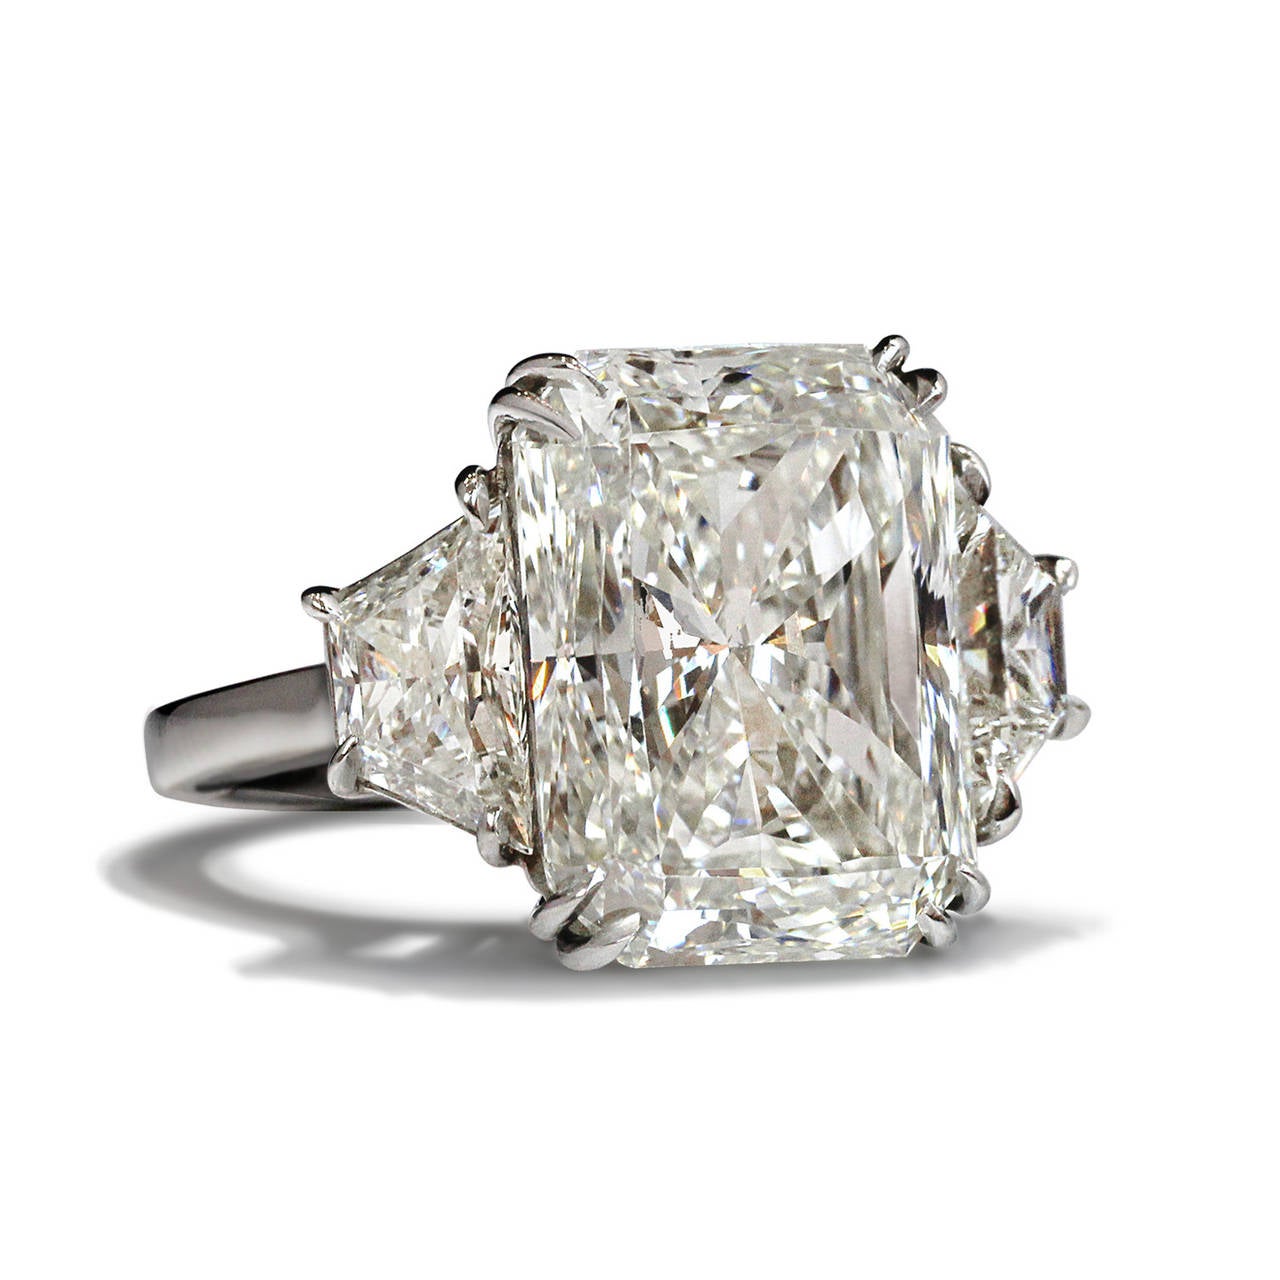 This 12.35ct I VS2 GIA Certified captivating Radiant cut Diamond is set in a hand made Platinum mounting with perfectly matched trapezoids of equal quality. 

David Rosenberg is President of the Diamond Bourse of the Southeastern United States and